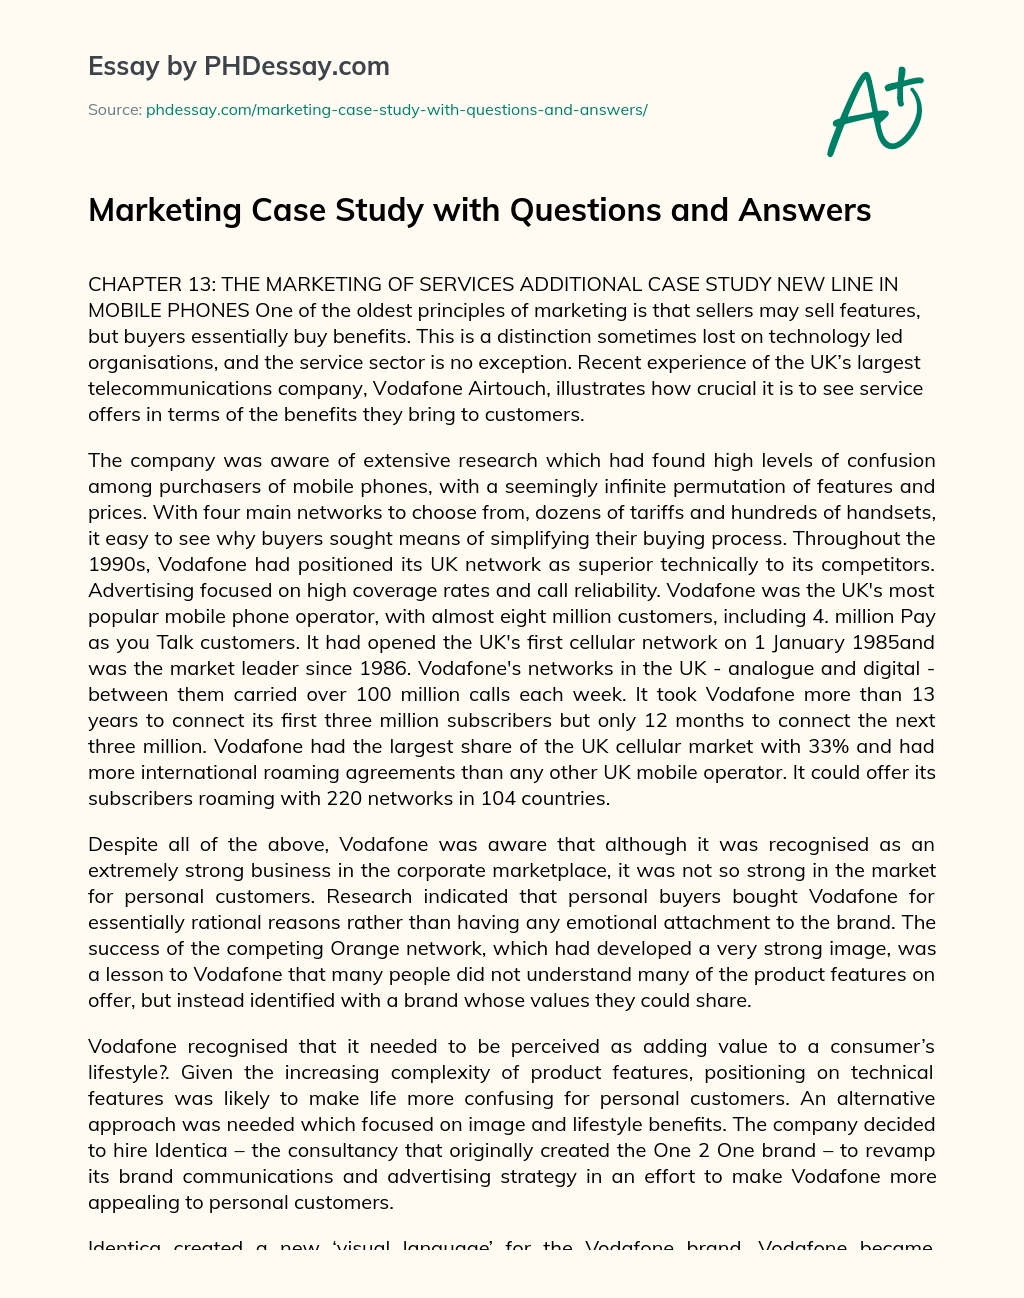 Marketing Case Study with Questions and Answers essay